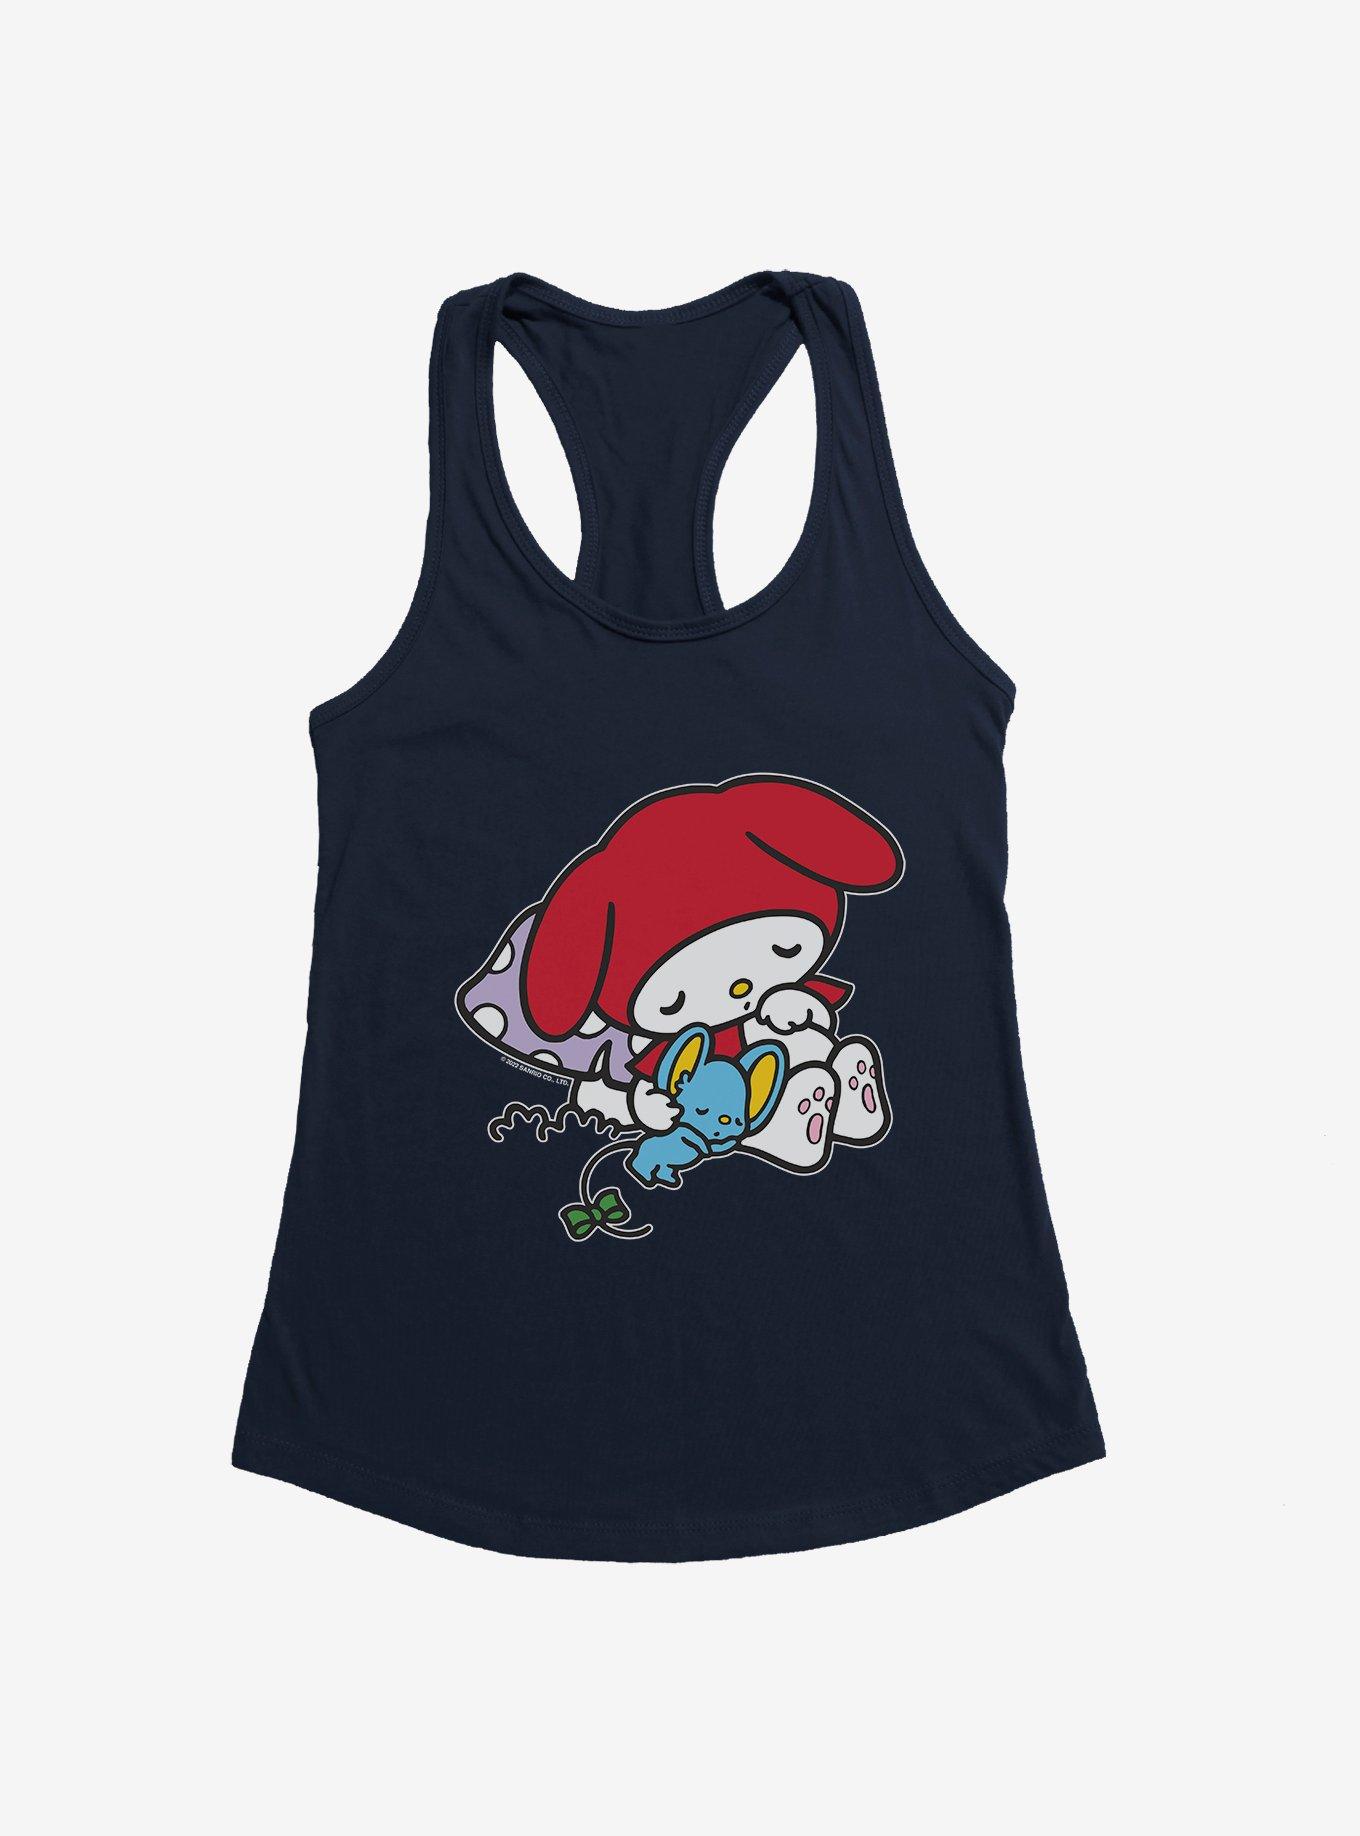 My Melody Napping With Flat Girls Tank, , hi-res